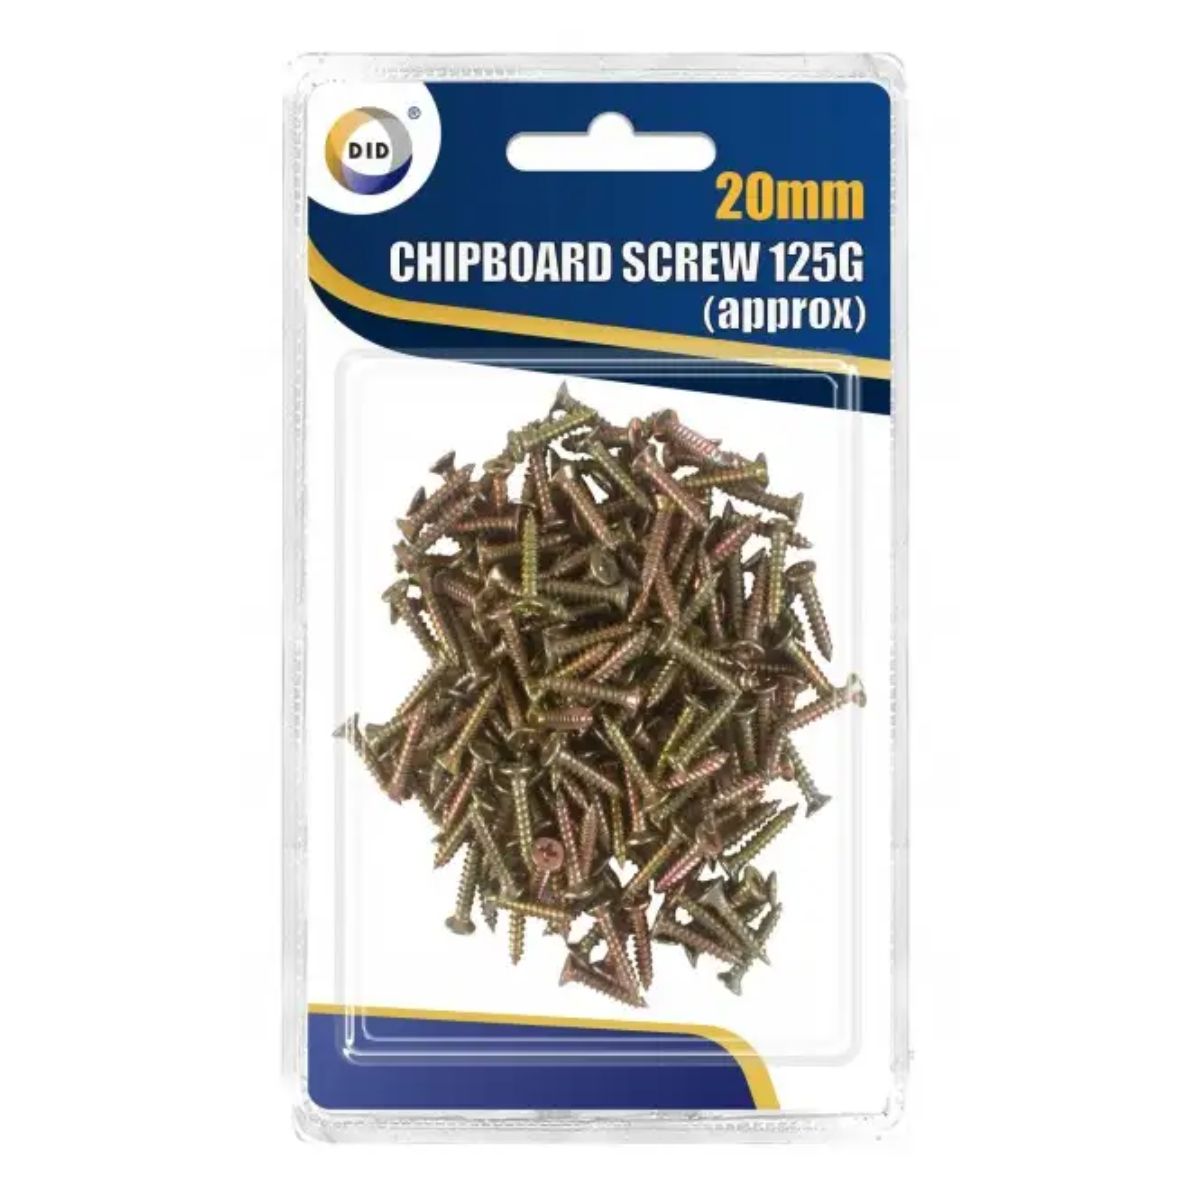 Packaging of DID - Chipboard Screws 20mm - 125g, displayed in a clear plastic blister pack with a blue and yellow label.